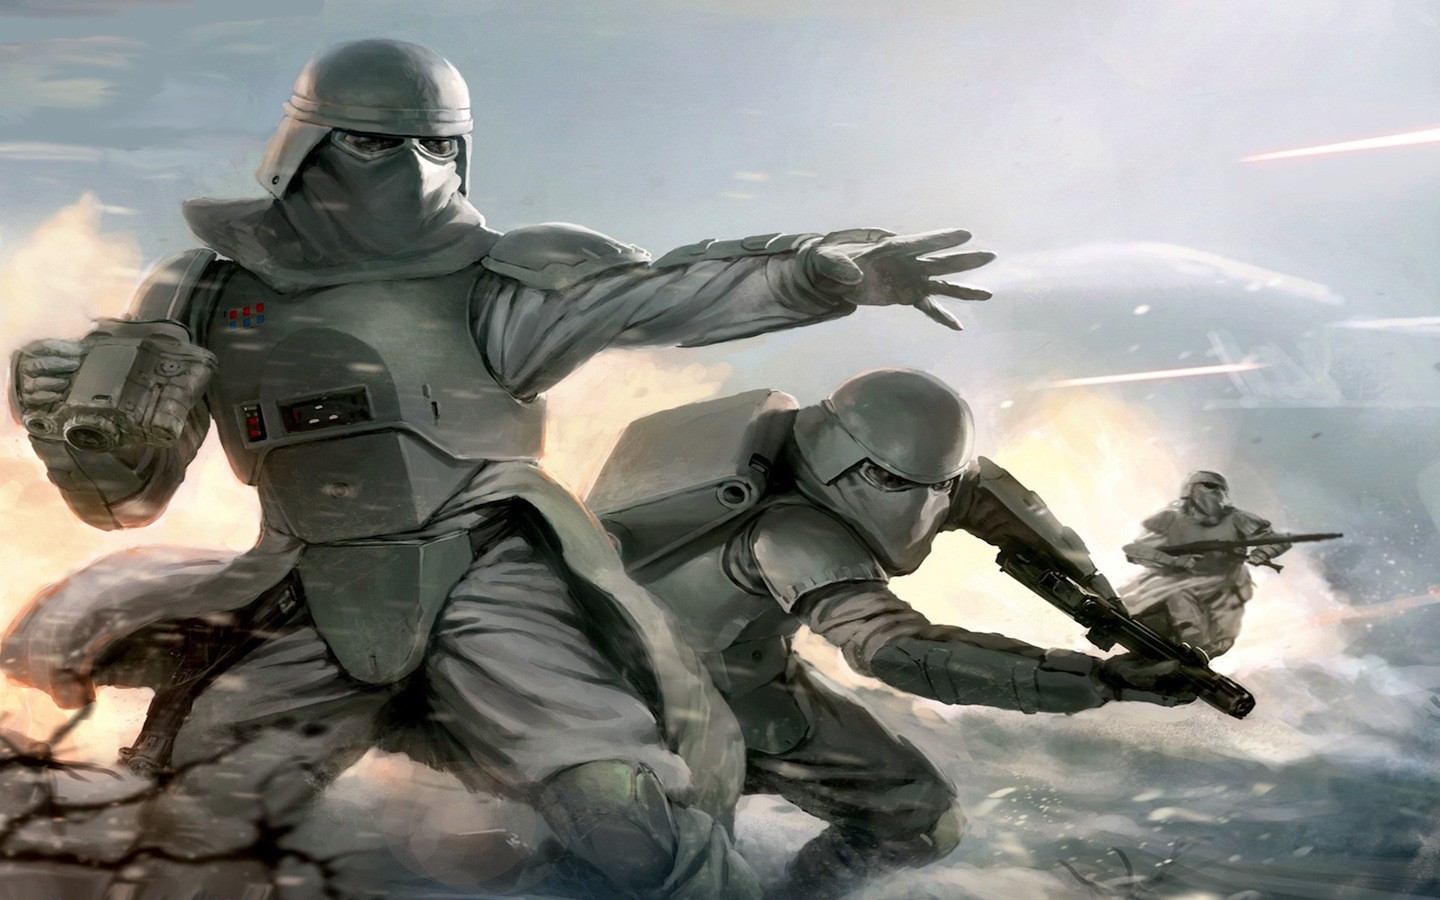 Wallpaper, Star Wars, soldier, stormtrooper, Star Wars Episode V The Empire Strikes Back, 1440x900 px, computer wallpaper, personal protective equipment, pc game, mercenary, reconnaissance, infantry, troop, army men, militia, adventurer, cg